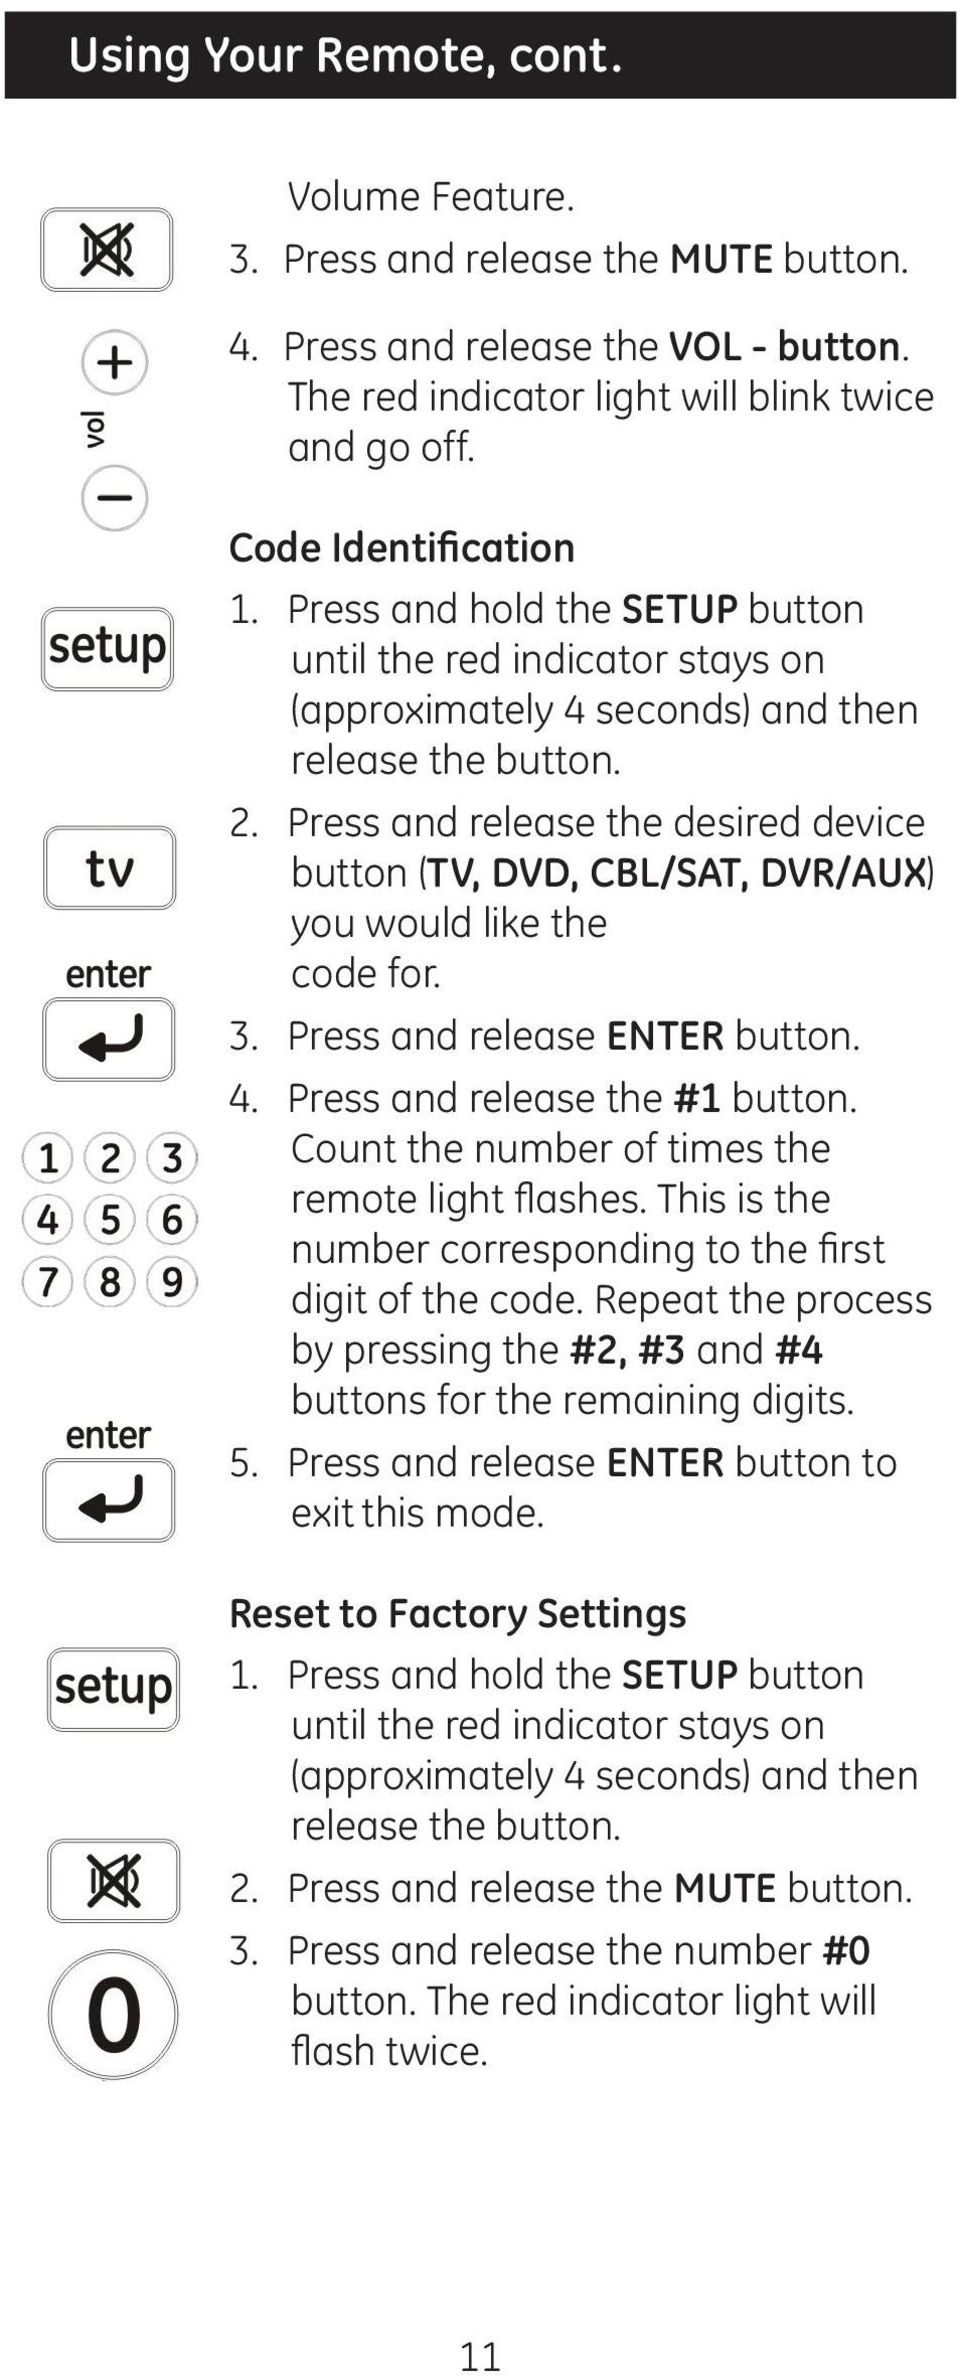 Press and release the desired device button (TV, DVD, CBL/SAT, DVR/AUX) you would like the code for. 3. Press and release ENTER button. 4. Press and release the #1 button.